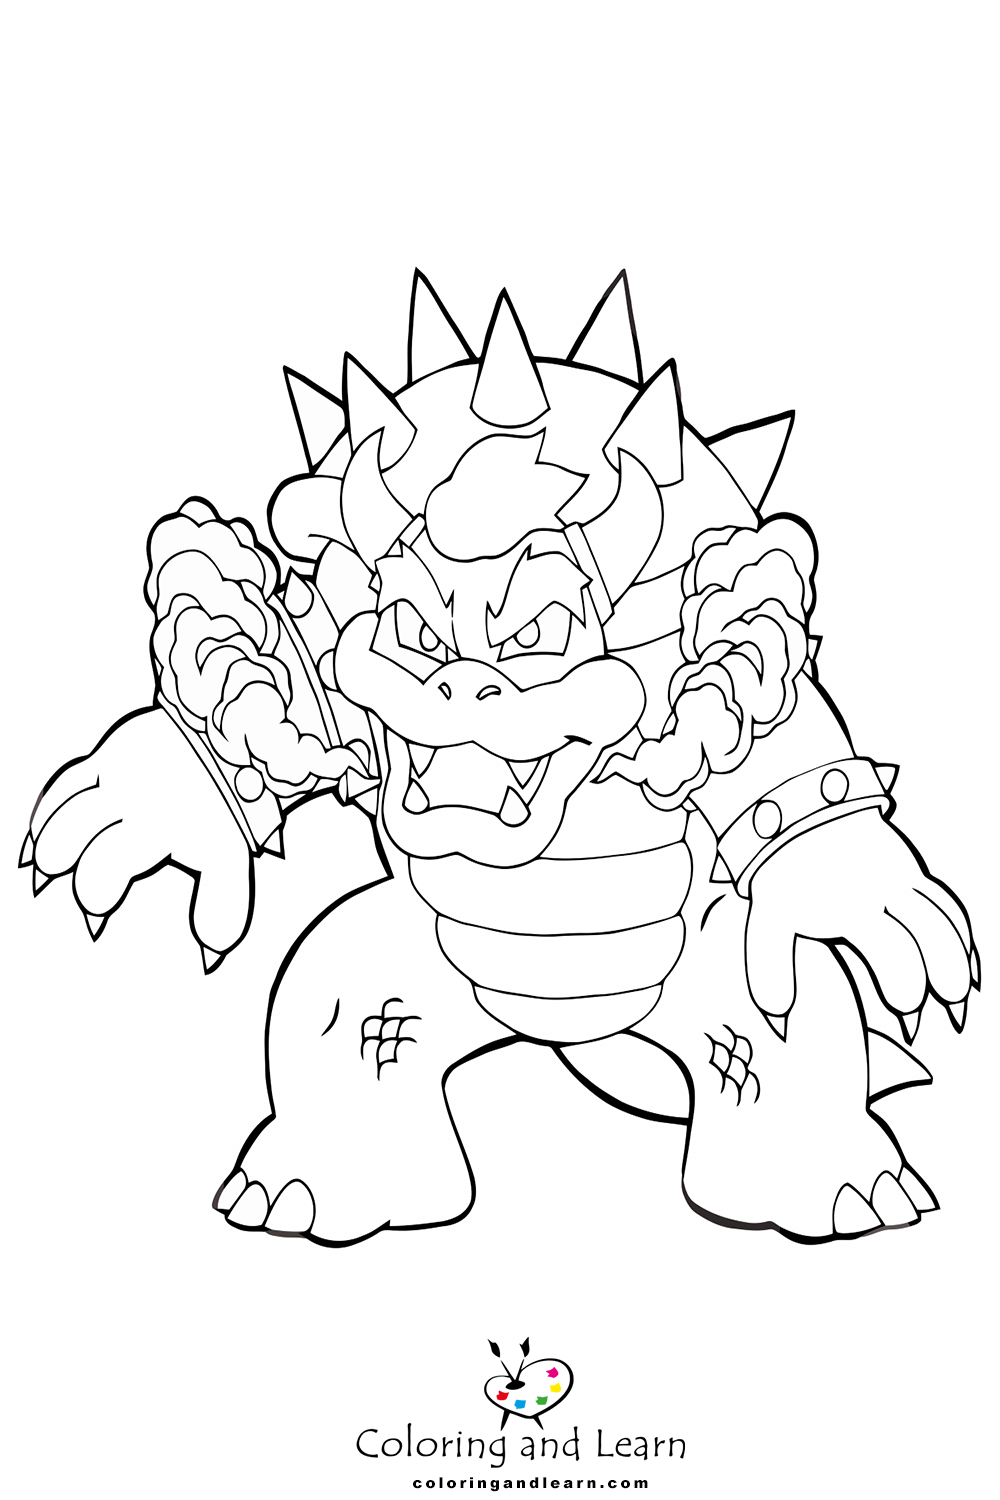 Bowser Coloring Pages - Best Coloring Pages For Kids  Mario coloring  pages, Cartoon coloring pages, Super mario coloring pages